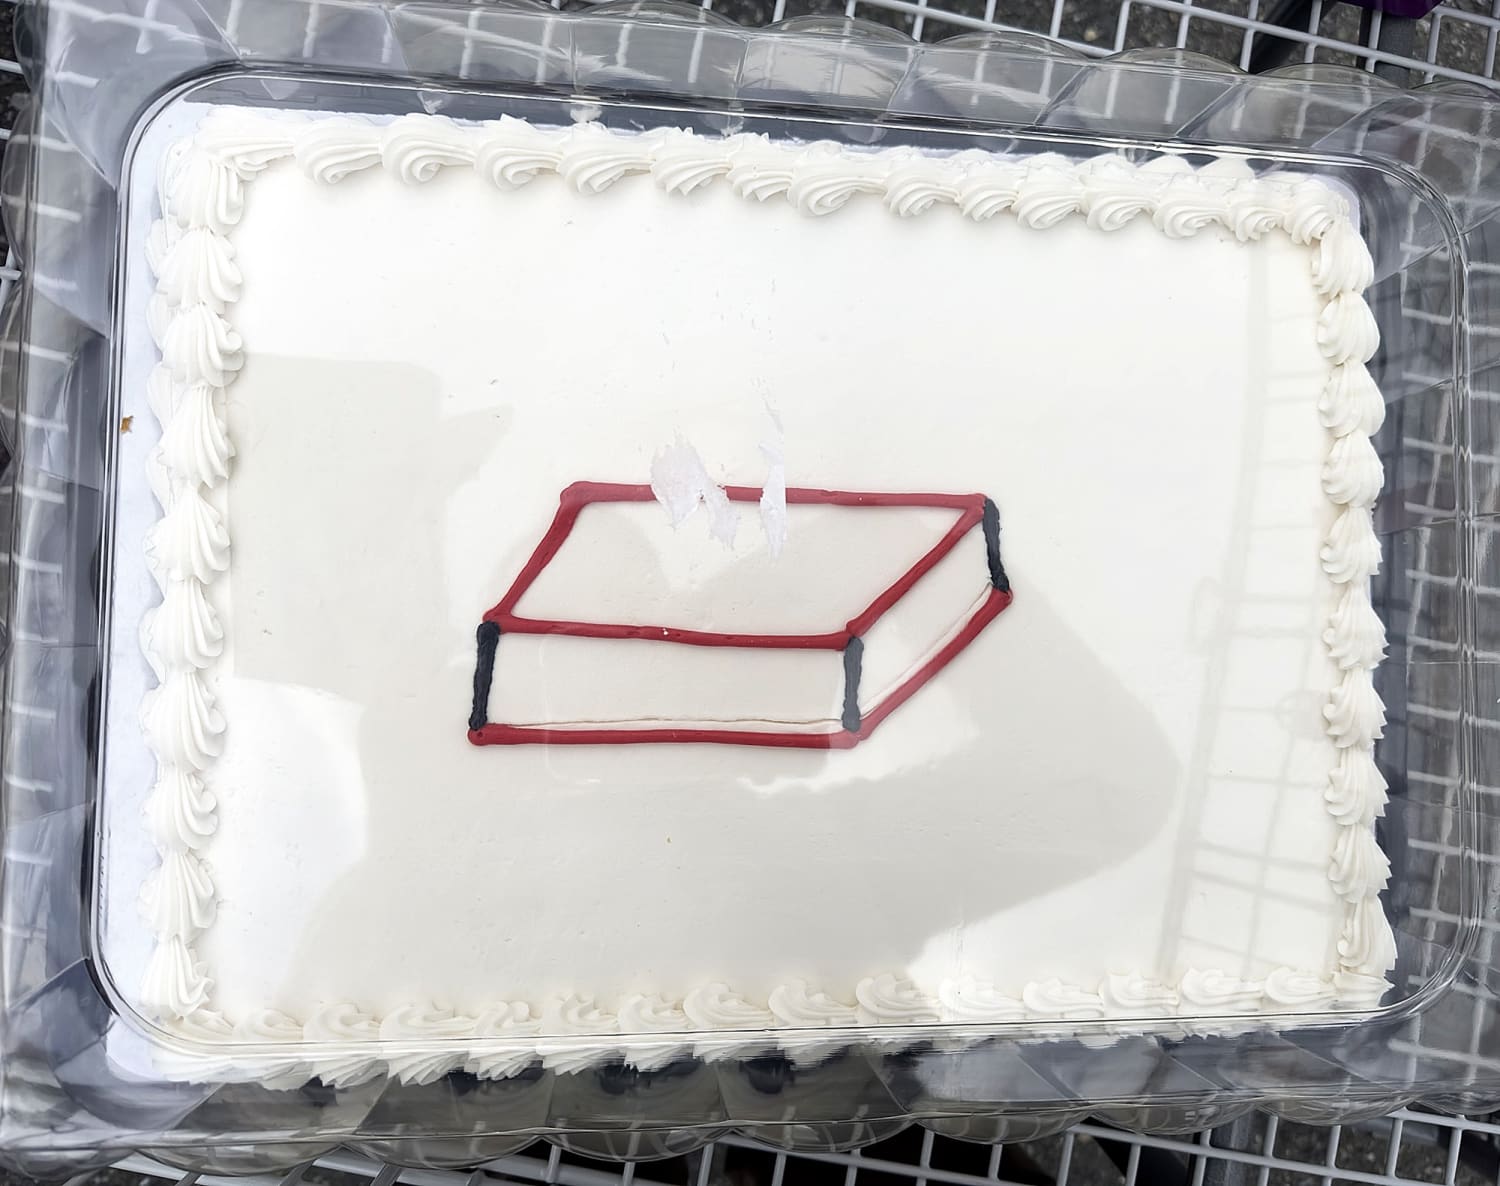 Costco Cake Fail: Very Literal Order Has the Internet Cracking Up